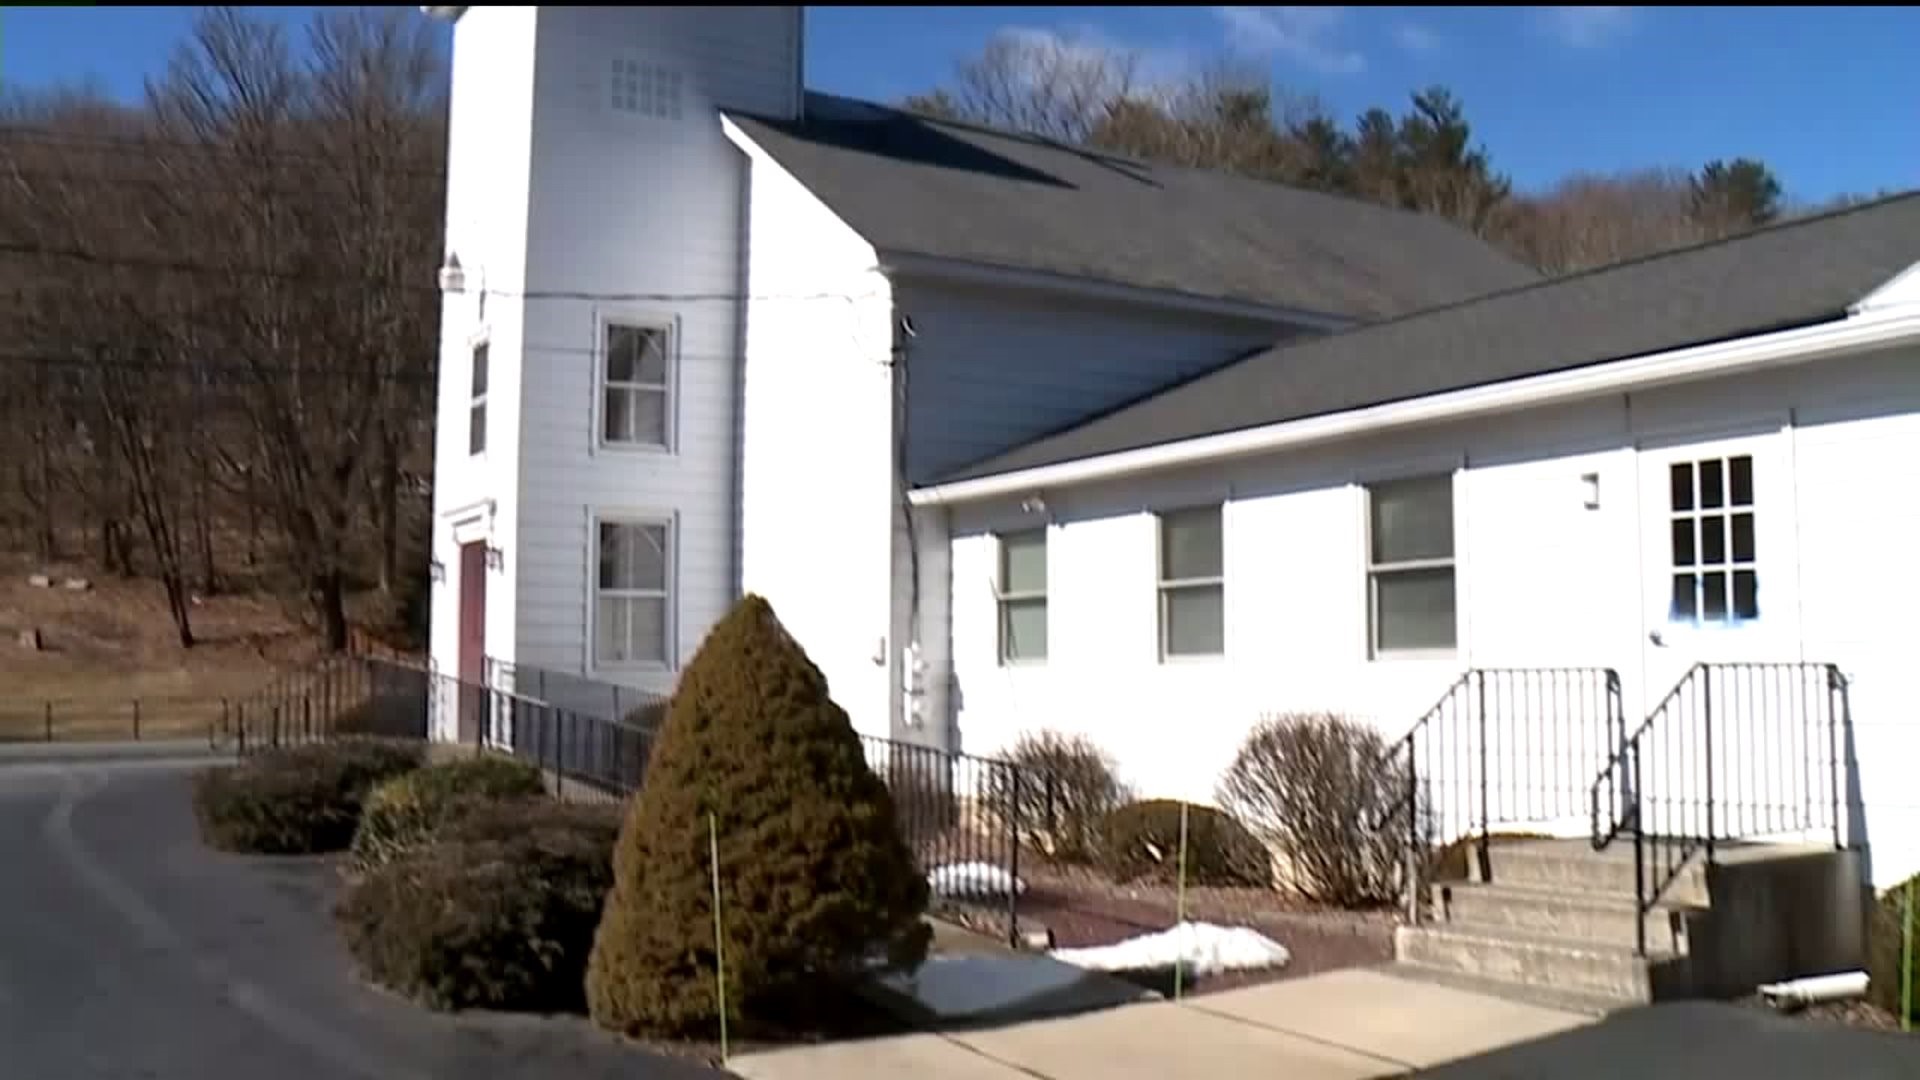 Racist Messages on Church in the Poconos Cleaned Up